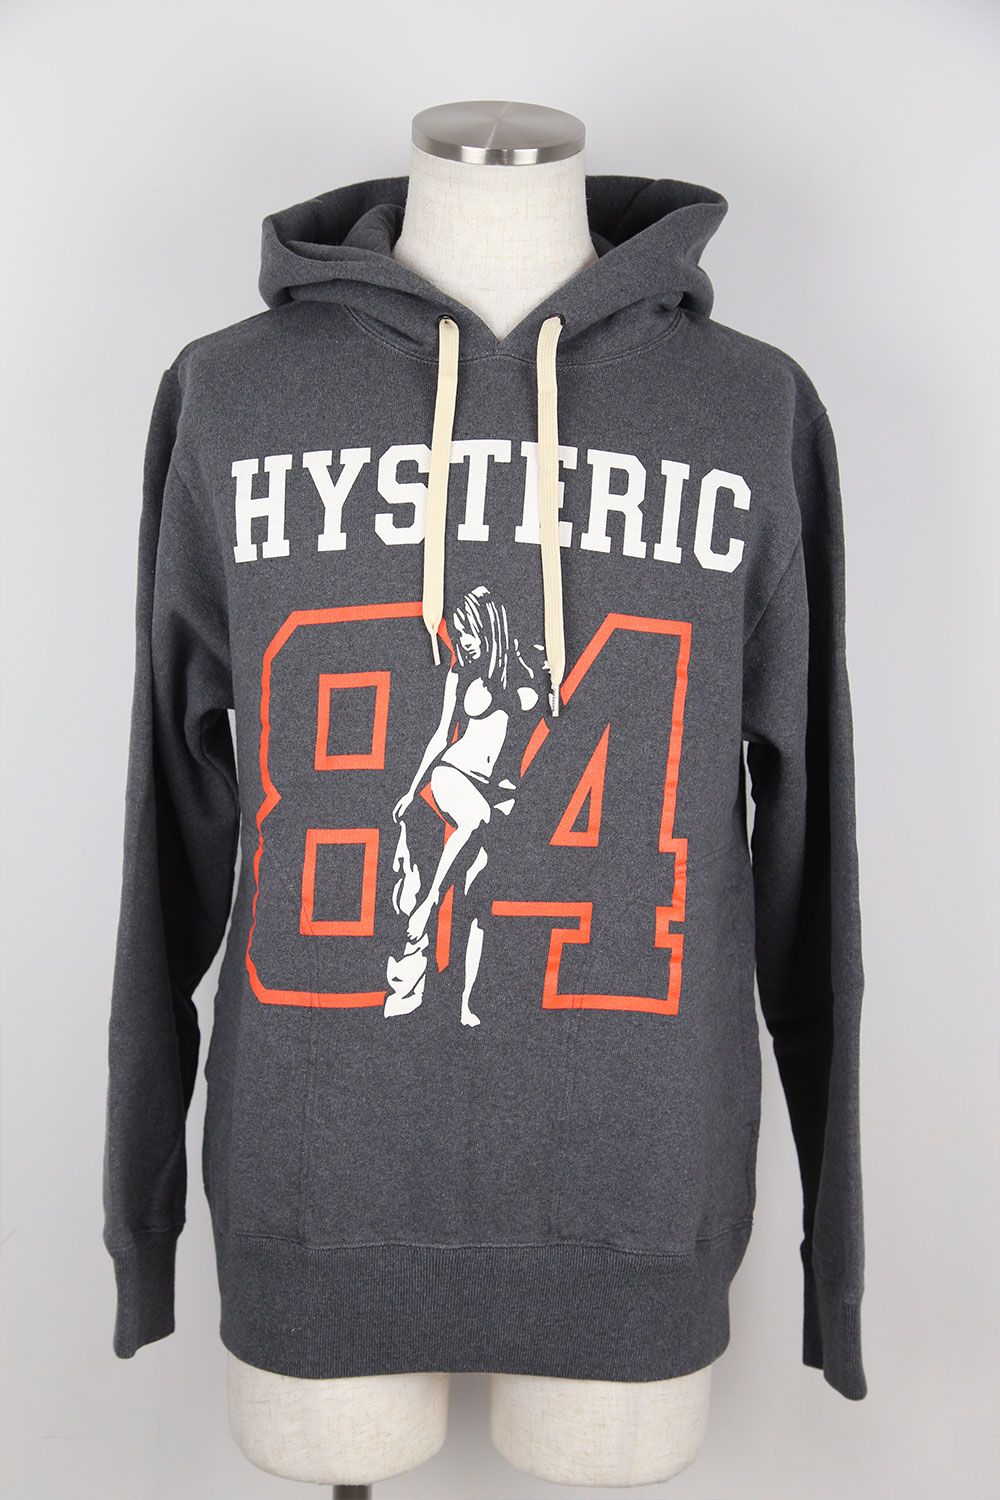 HYSTERIC GLAMOUR - HYS TIMES COLLEGE パーカー / トップグレー | Tempt